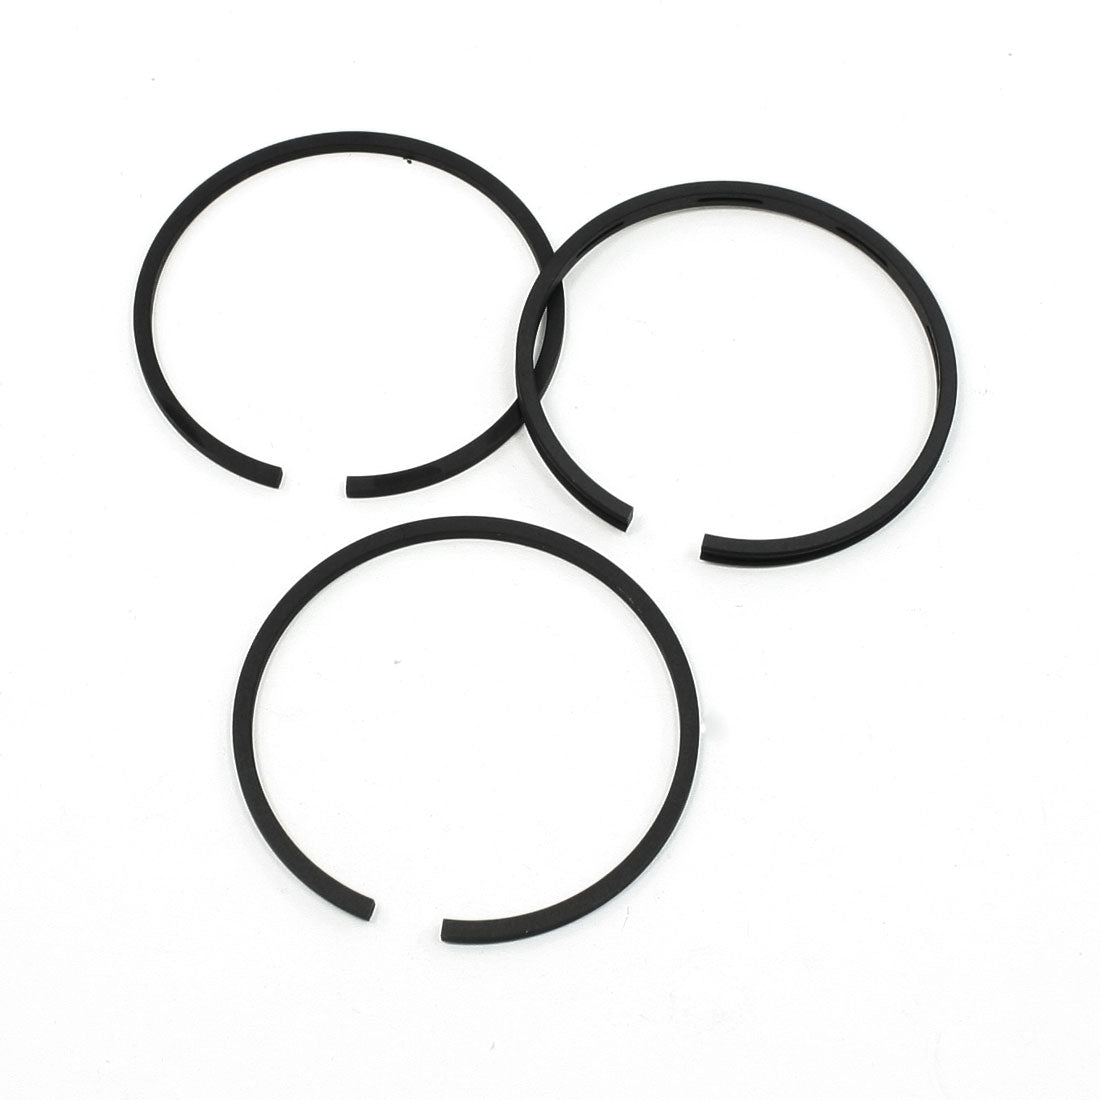 uxcell Uxcell 3 Pcs 65mm Diameter Piston Rings Set Replacement for Air Compressor